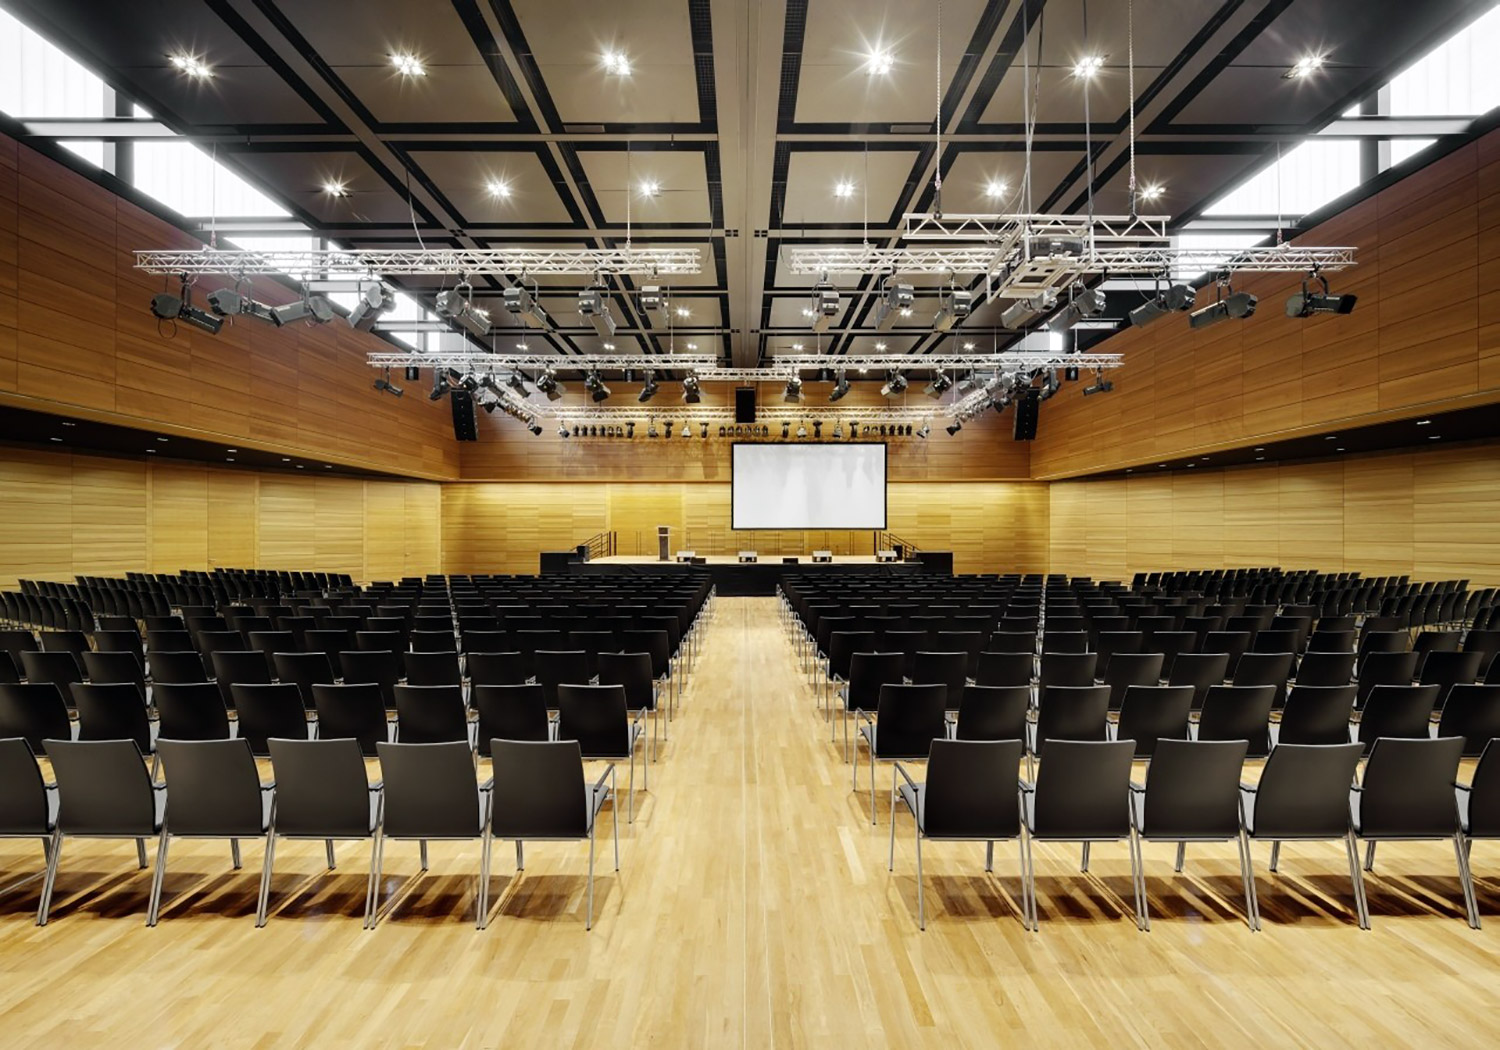 Worms Congress and Convention Center. Room acoustics and A/V systems design by WSDG / ADA-AMC.